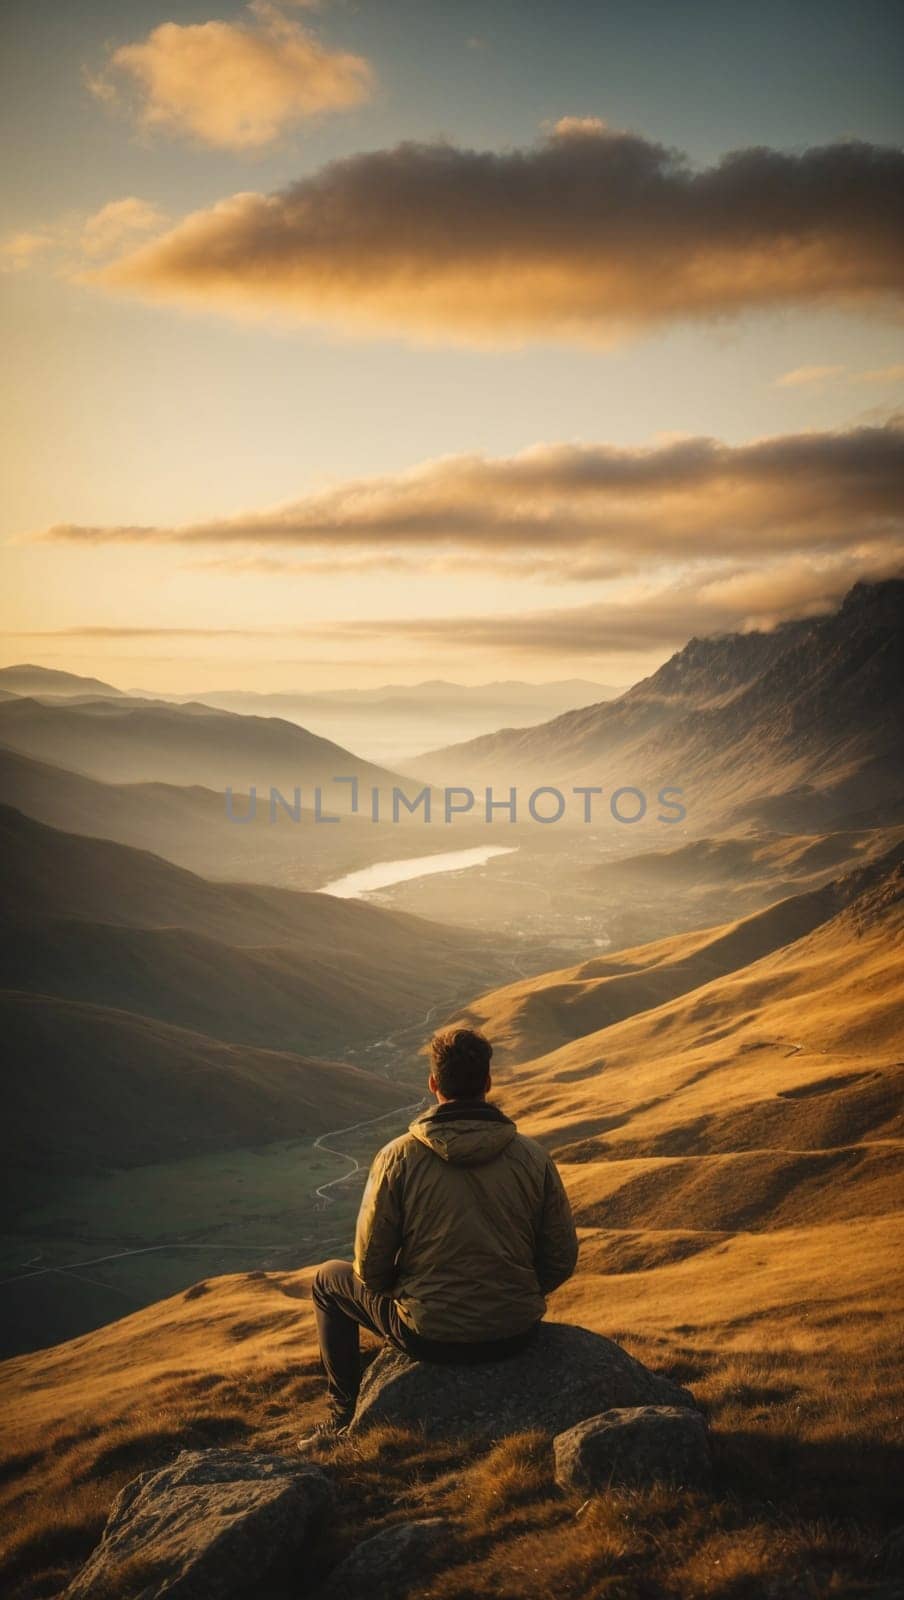 A man sits atop a grassy hillside, enjoying the view and the peaceful surroundings.